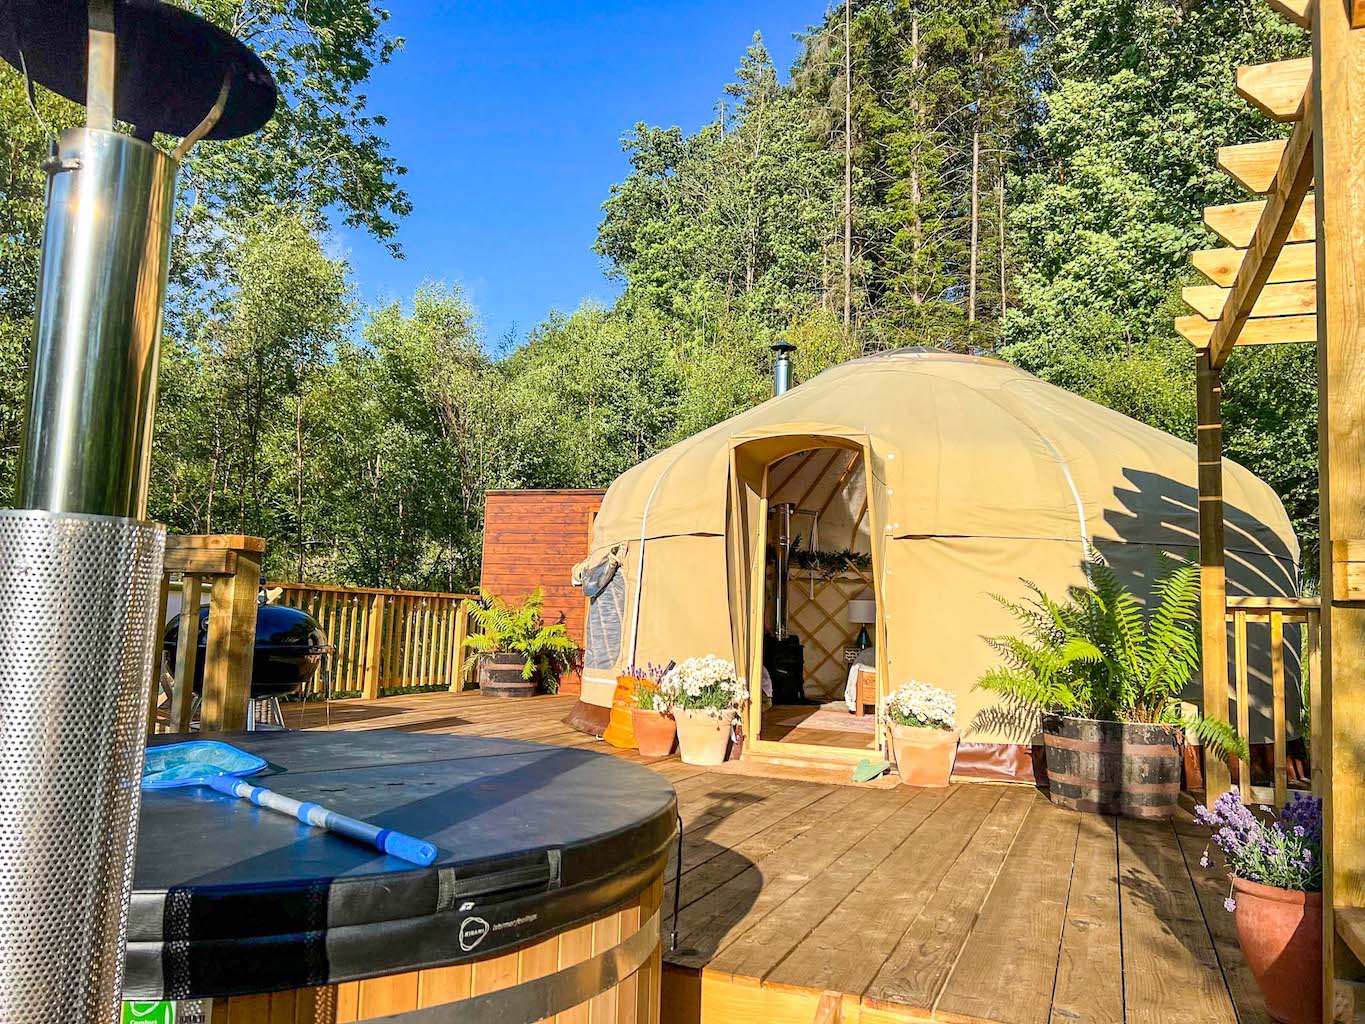 The Wandering Quinn Travel Blog Glamping in Yorkshire, Ash Yurt Yurtshire with hot tub